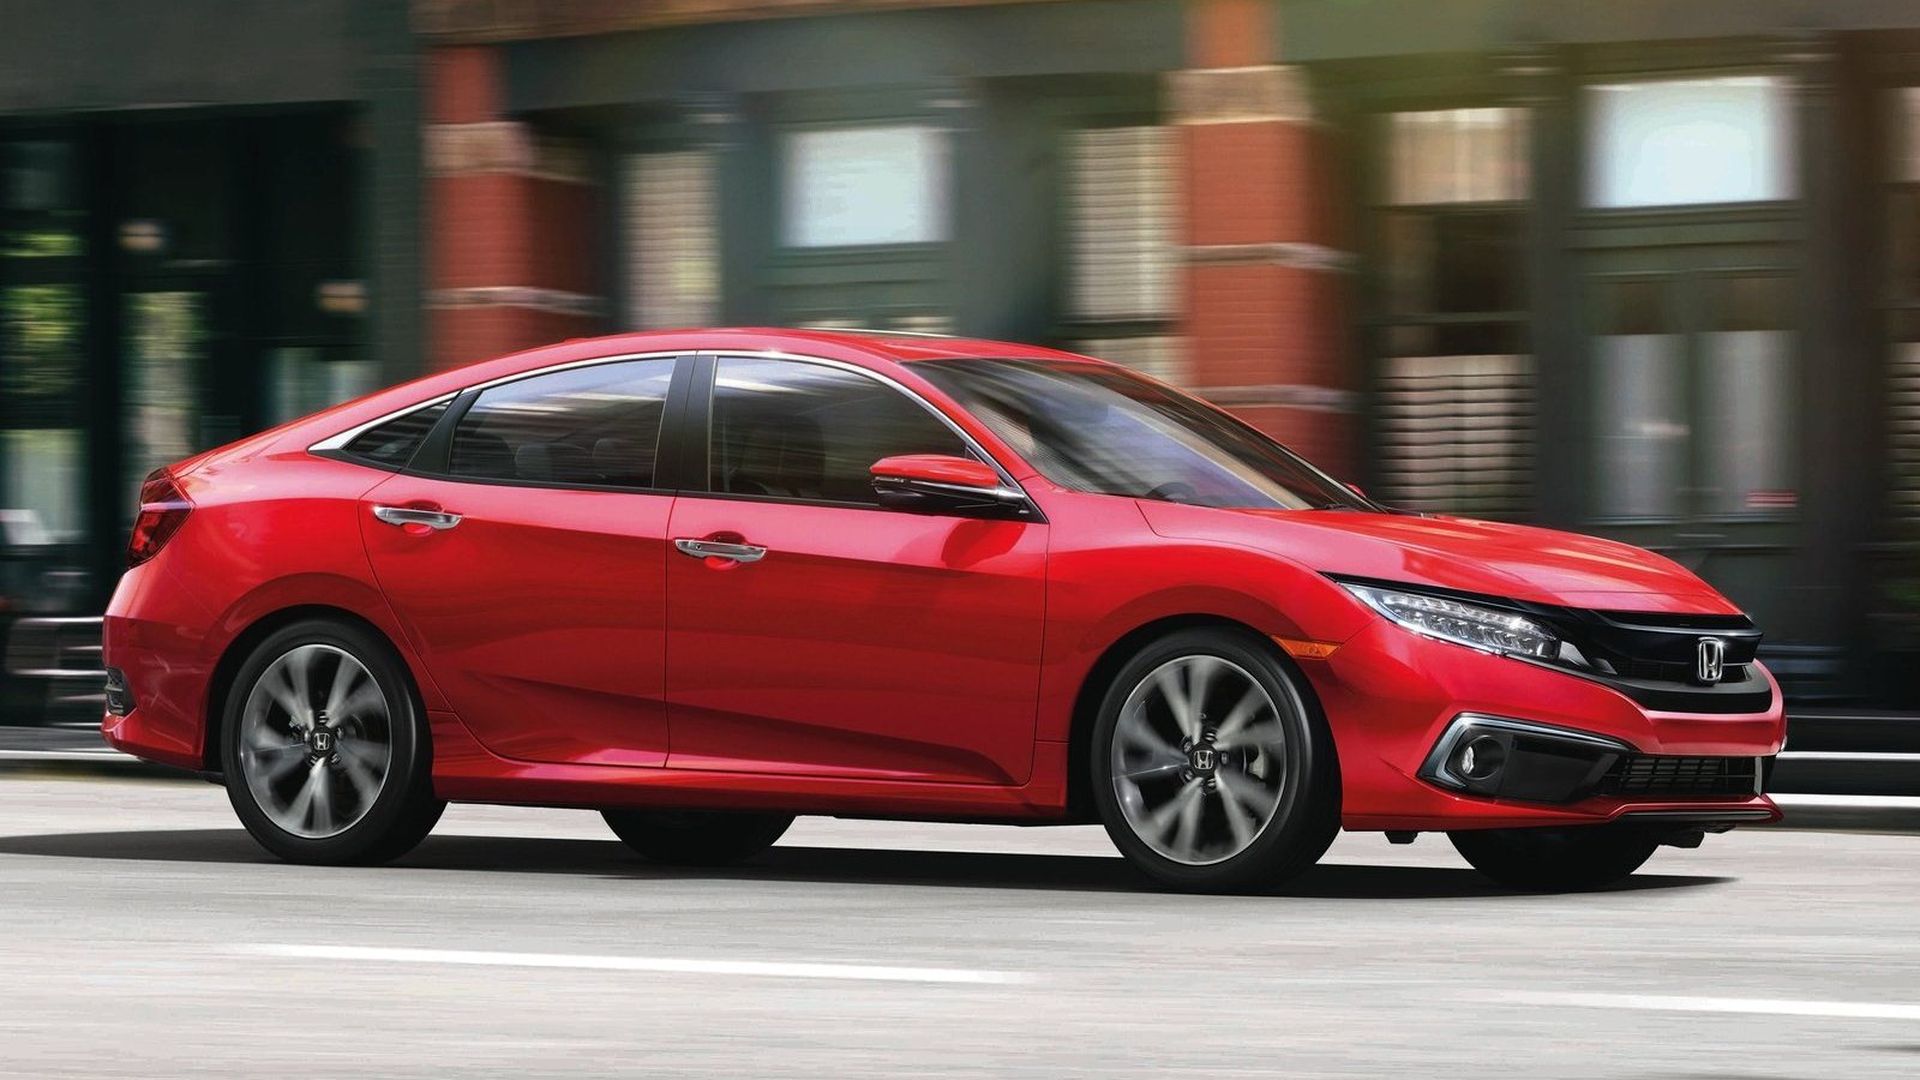 This image shows the Honda Civic driving down the road.